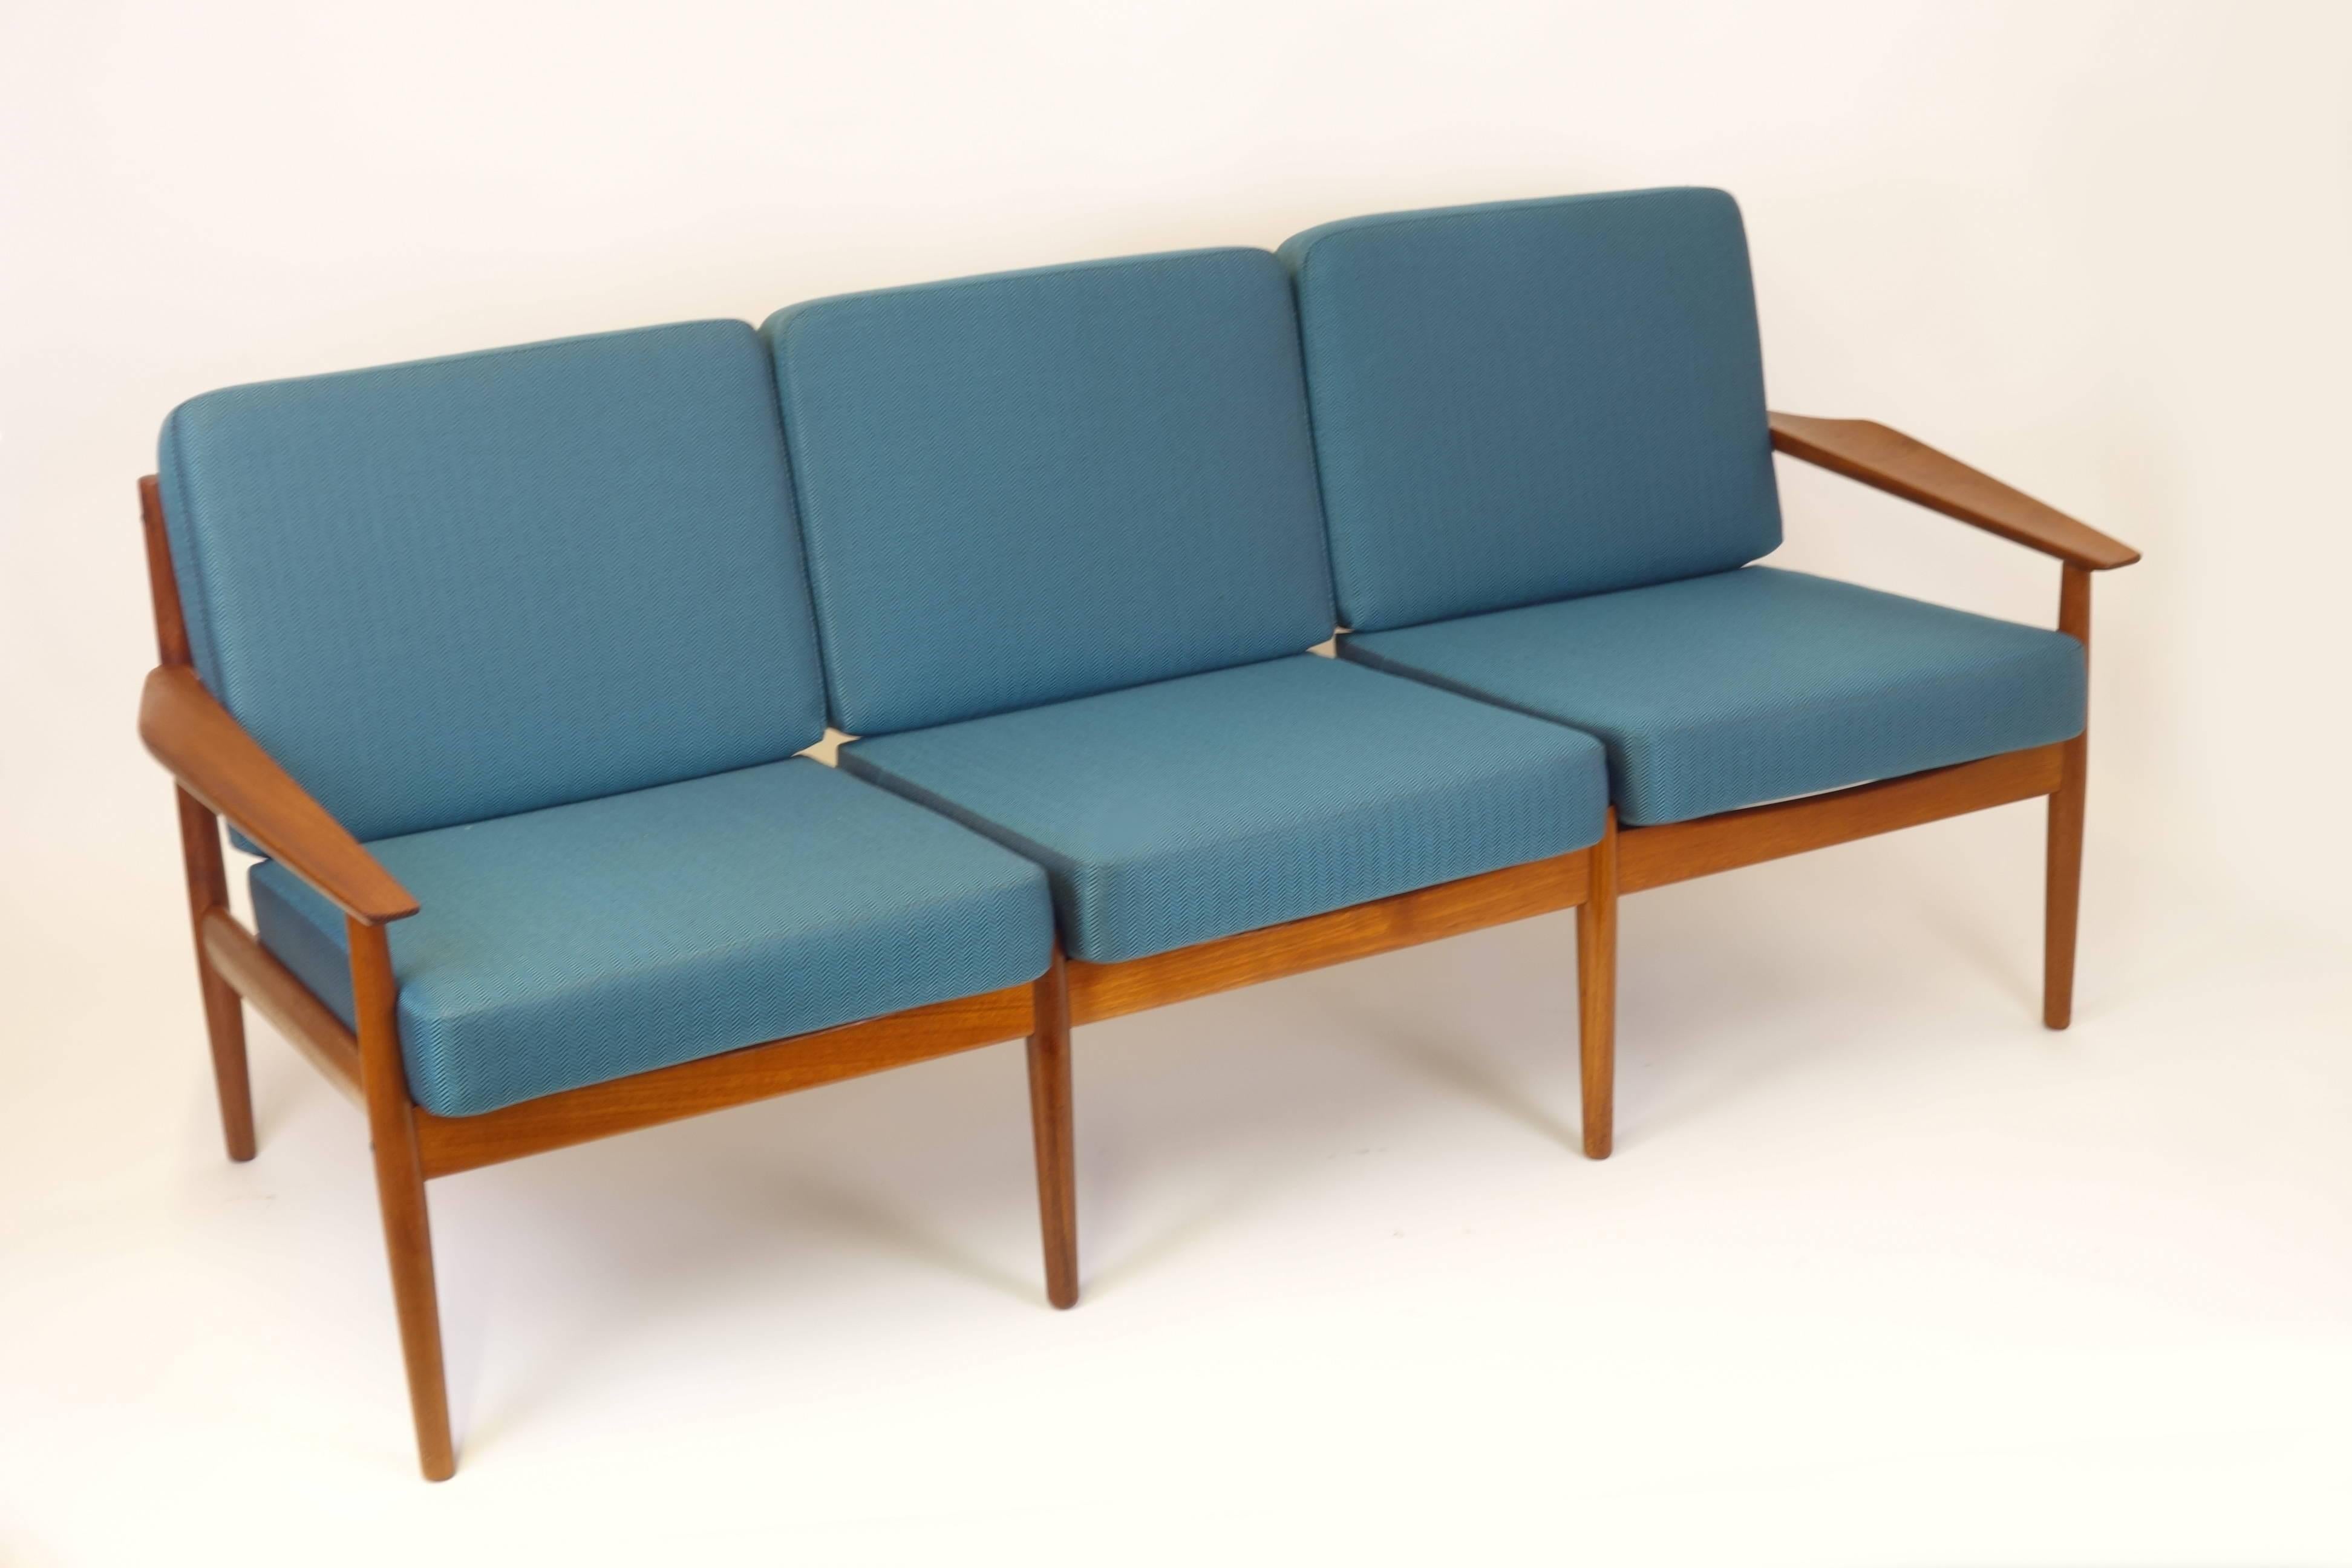 Teak Grete Jalk Suite Consisting of Coffee Table, Sofa and Armchairs, Denmark For Sale